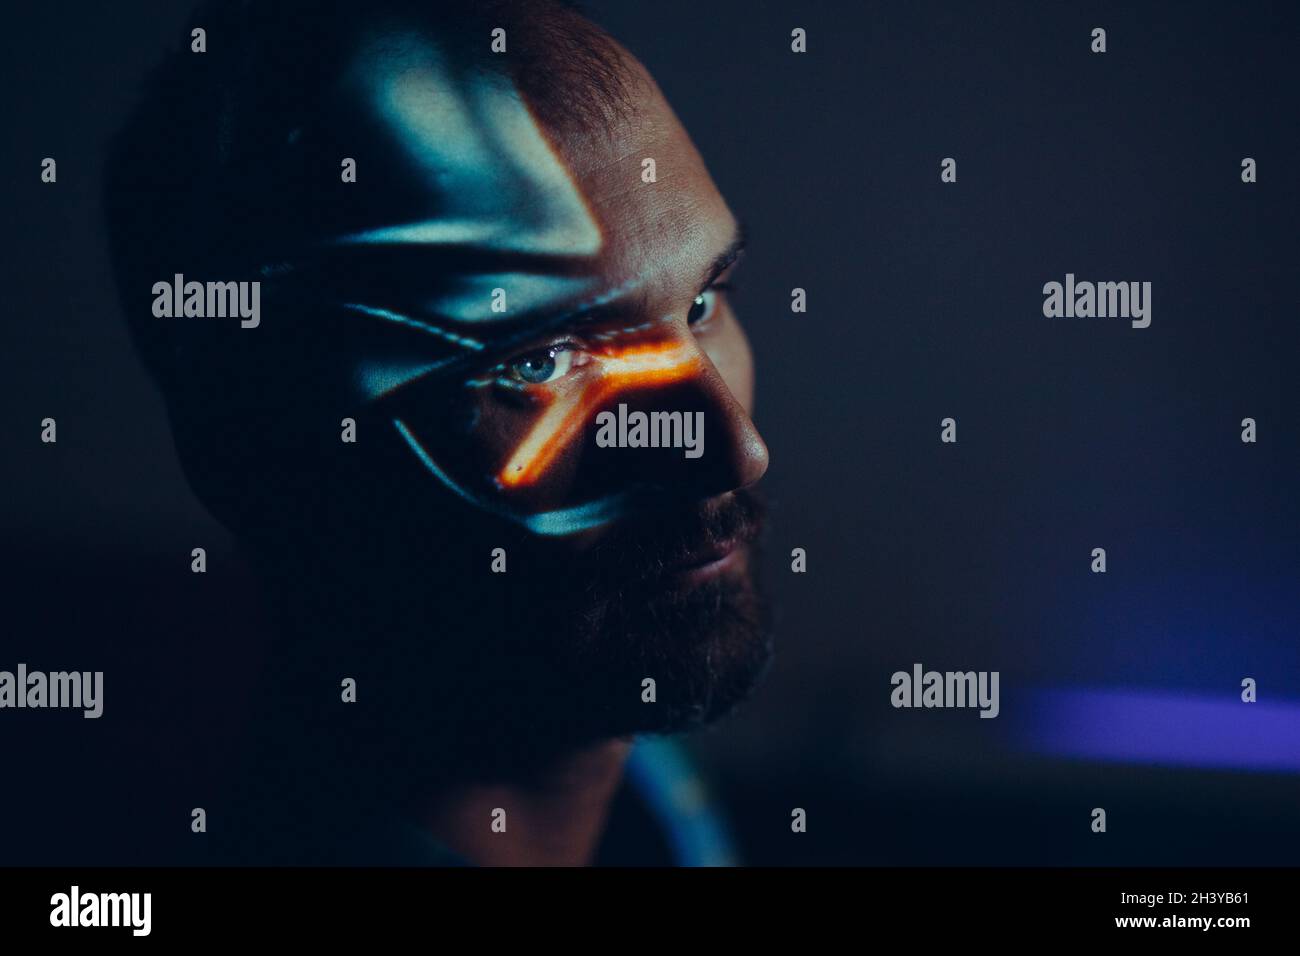 Artistic portrait of a man face in light paint projection. Stock Photo